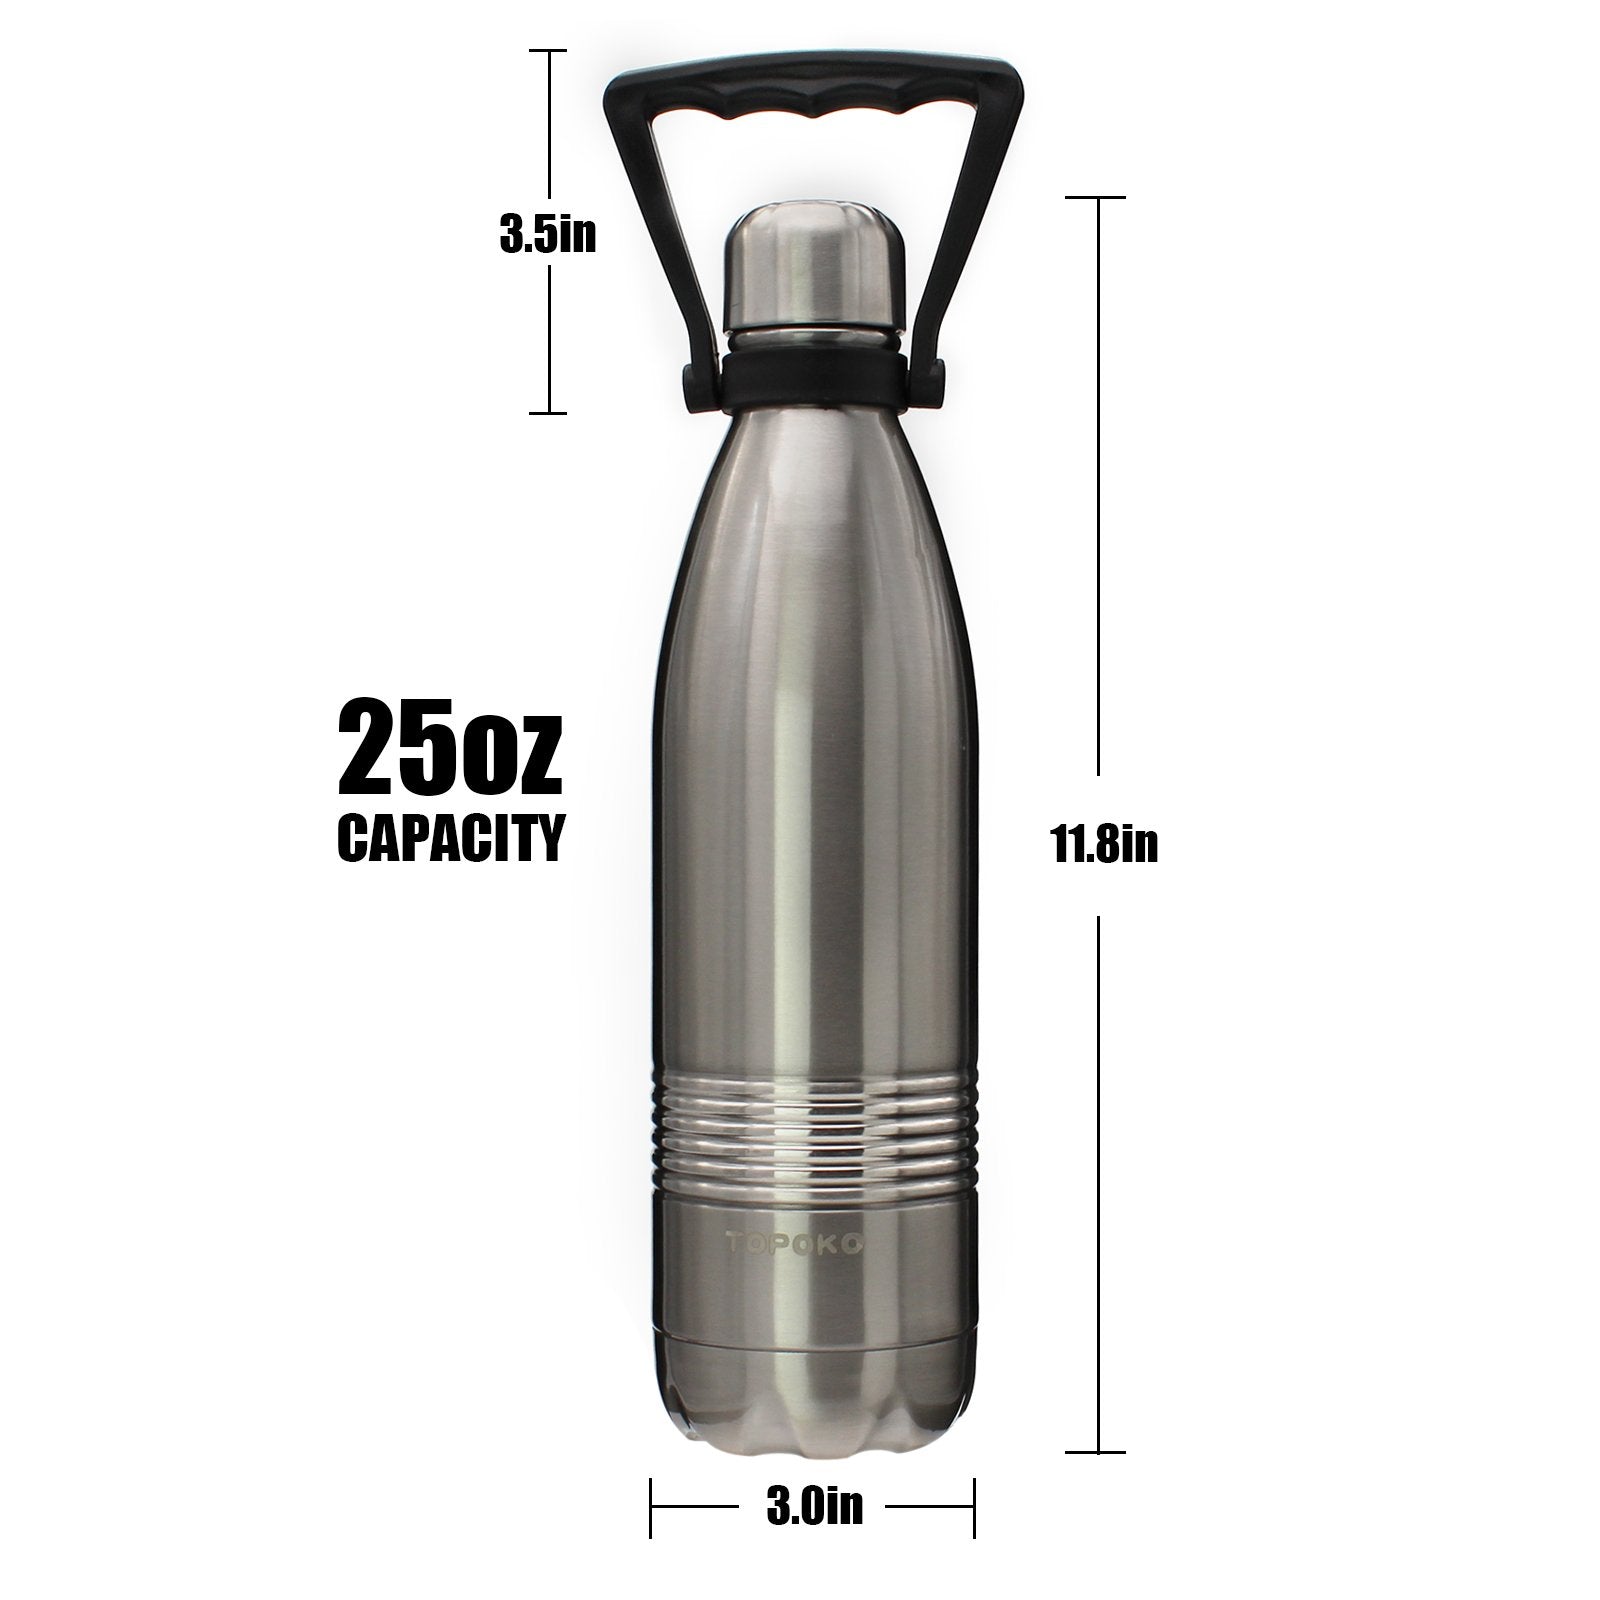 Insulated Water Bottle 9 oz Stainless Steel Double Wall Vacuum Flask (Black)